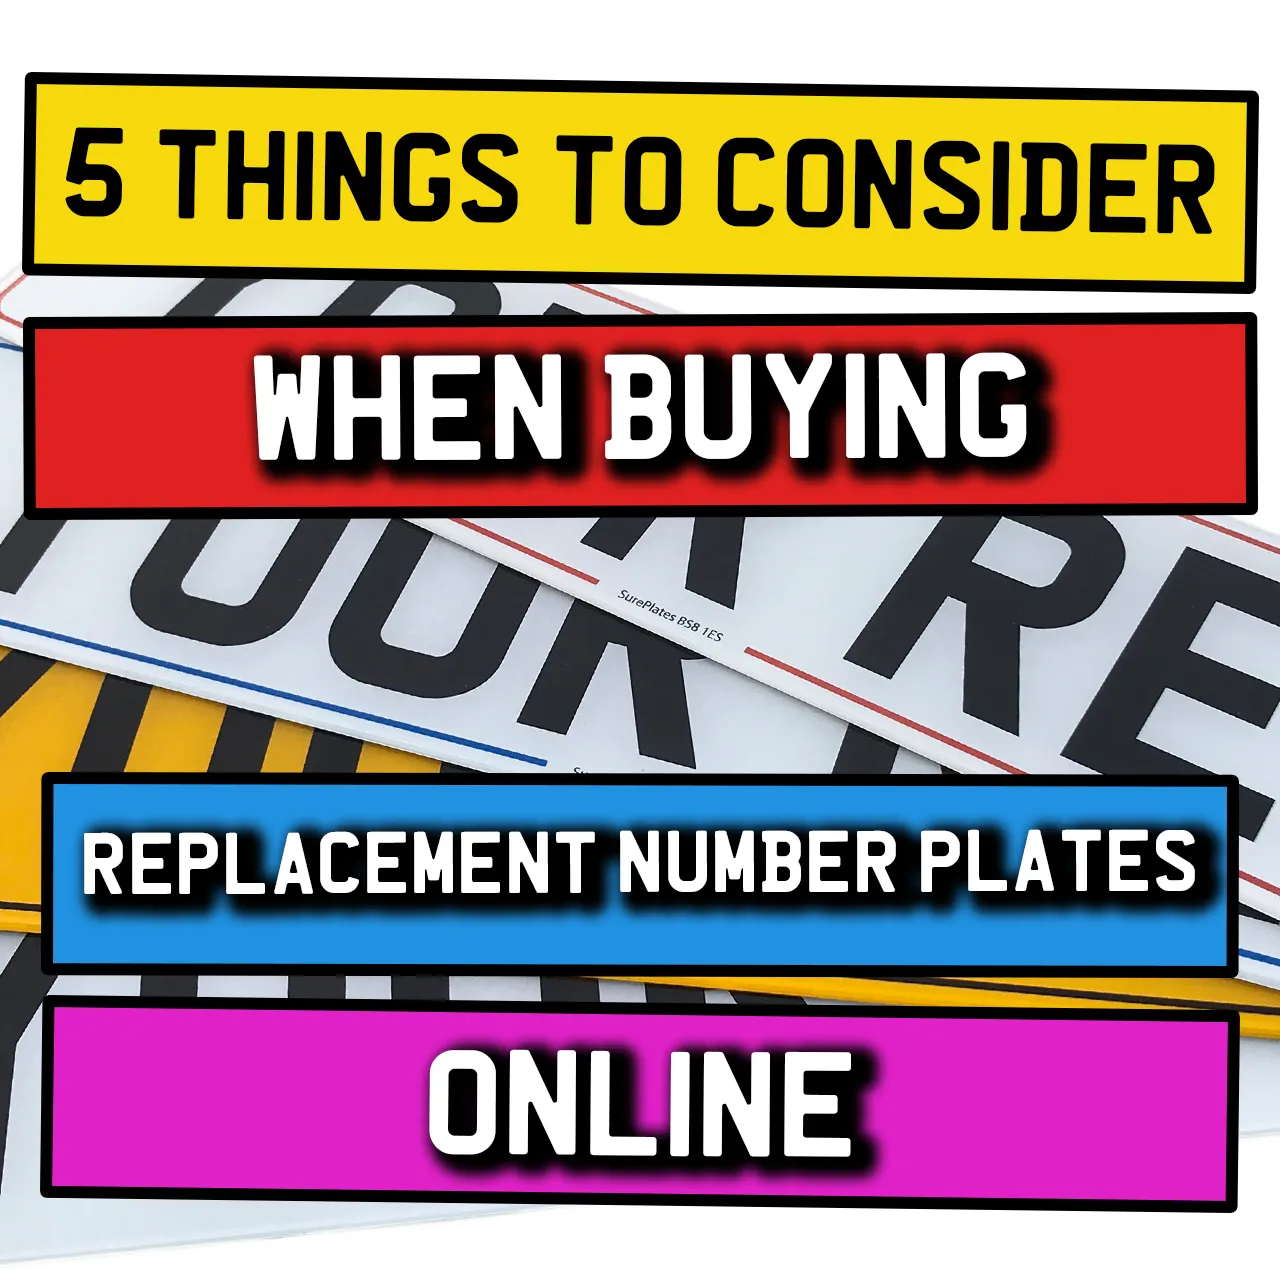 5 things to consider when buying replacement number plates online